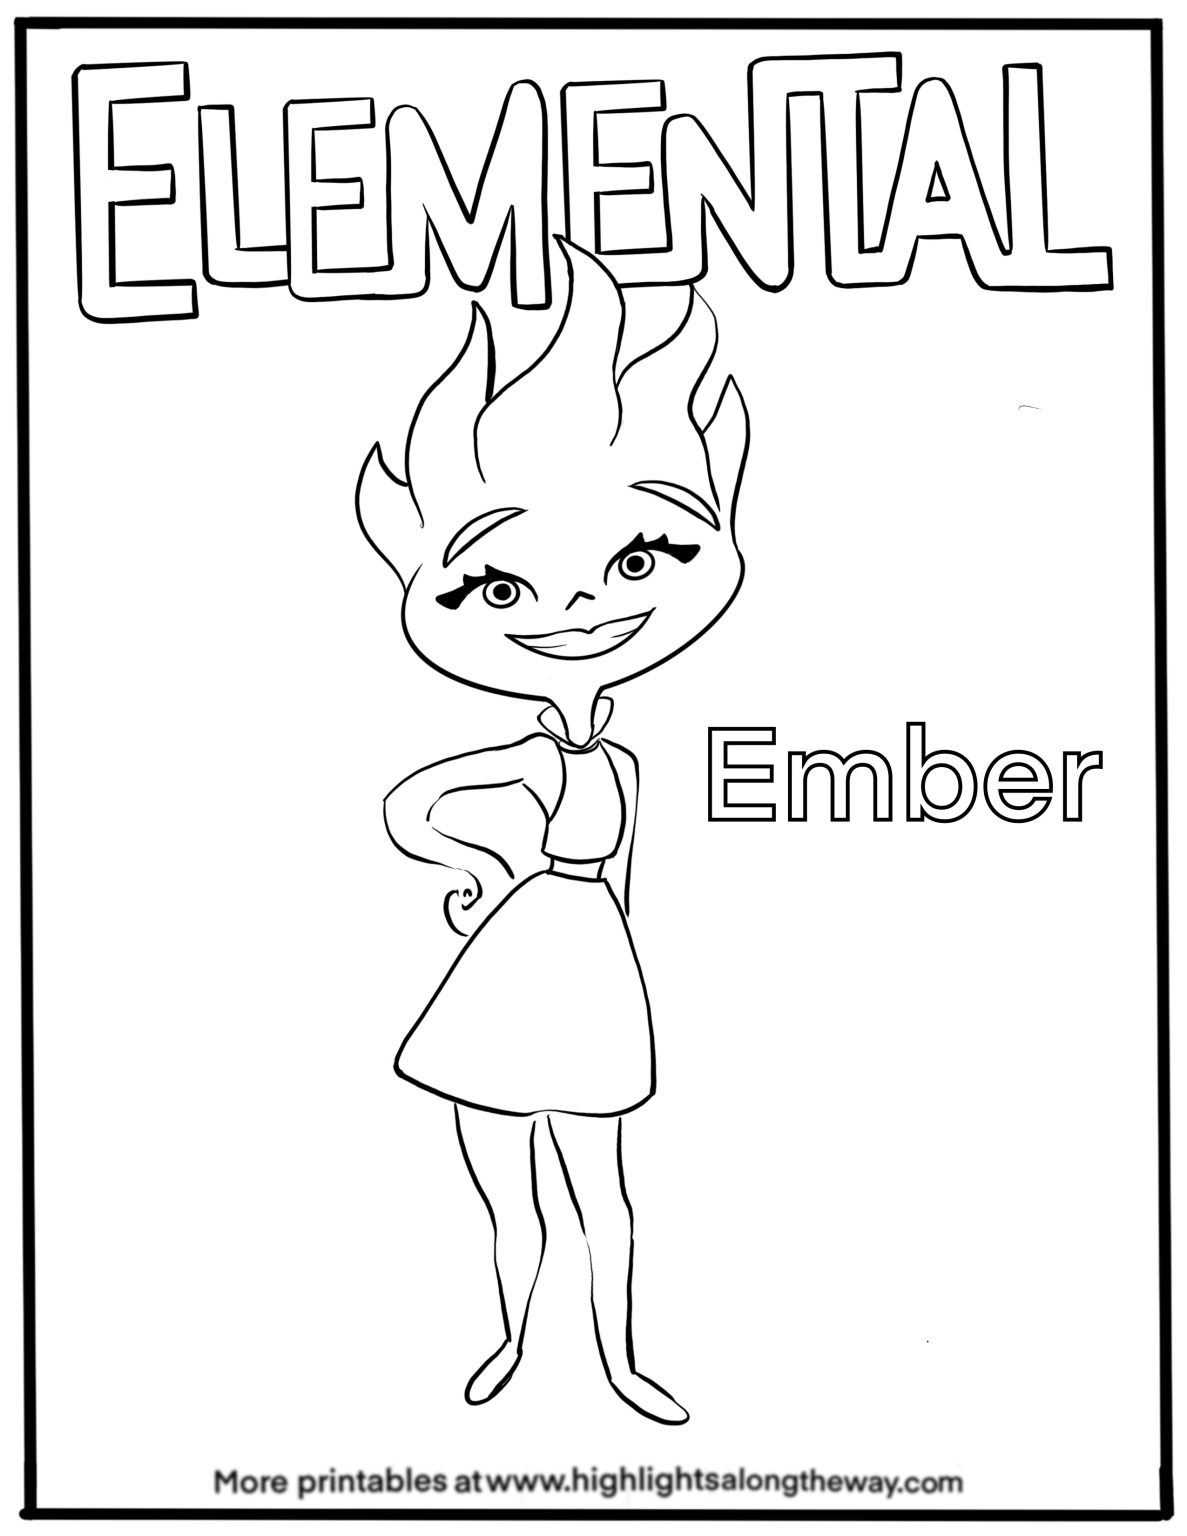 Elemental Printable Coloring Pages